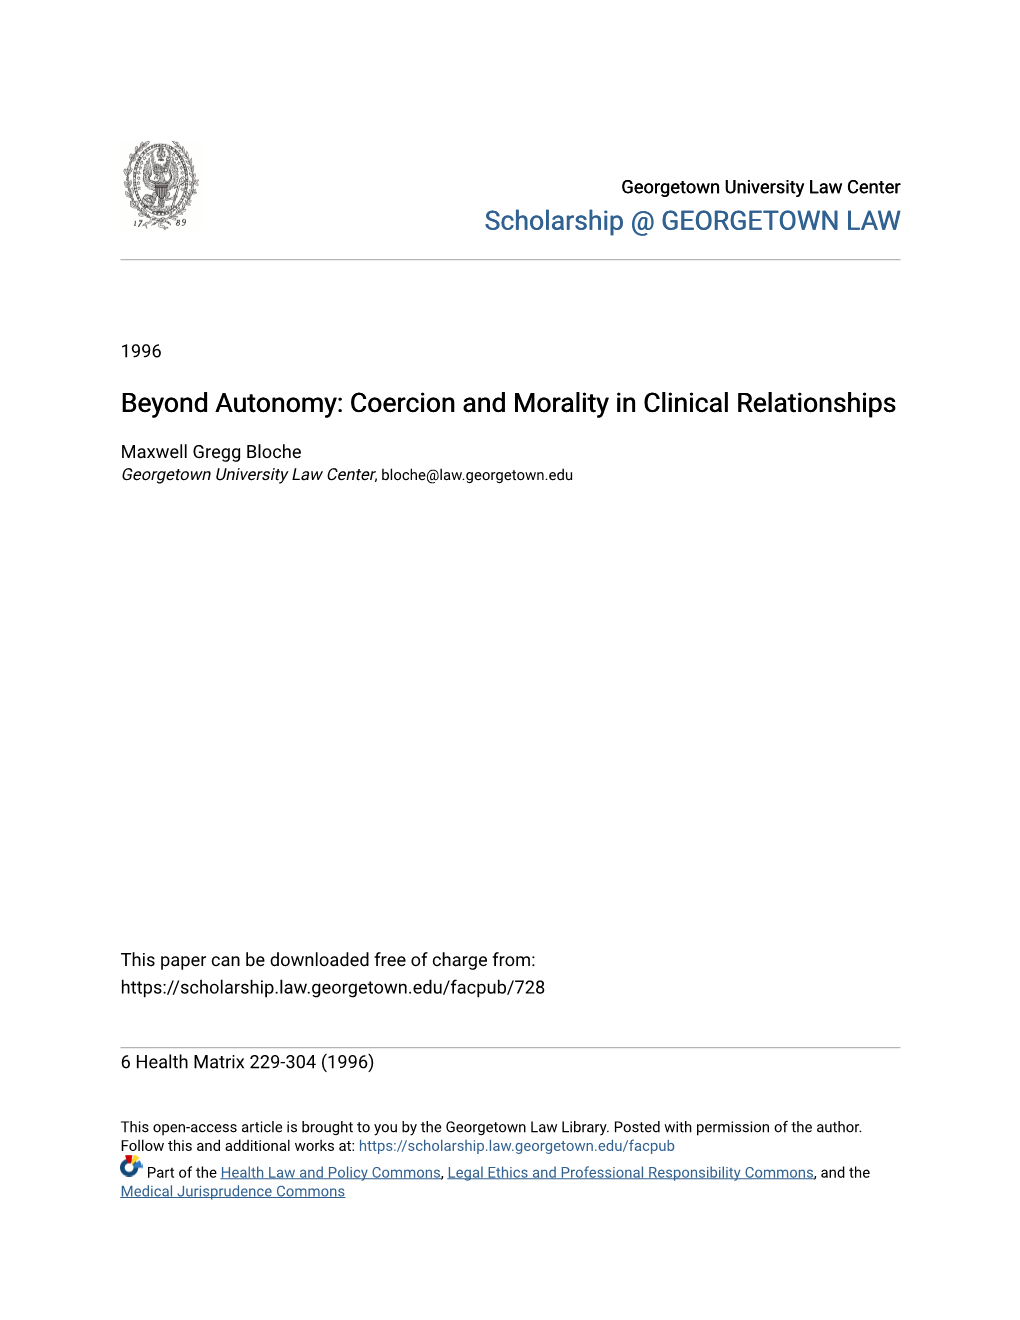 Beyond Autonomy: Coercion and Morality in Clinical Relationships